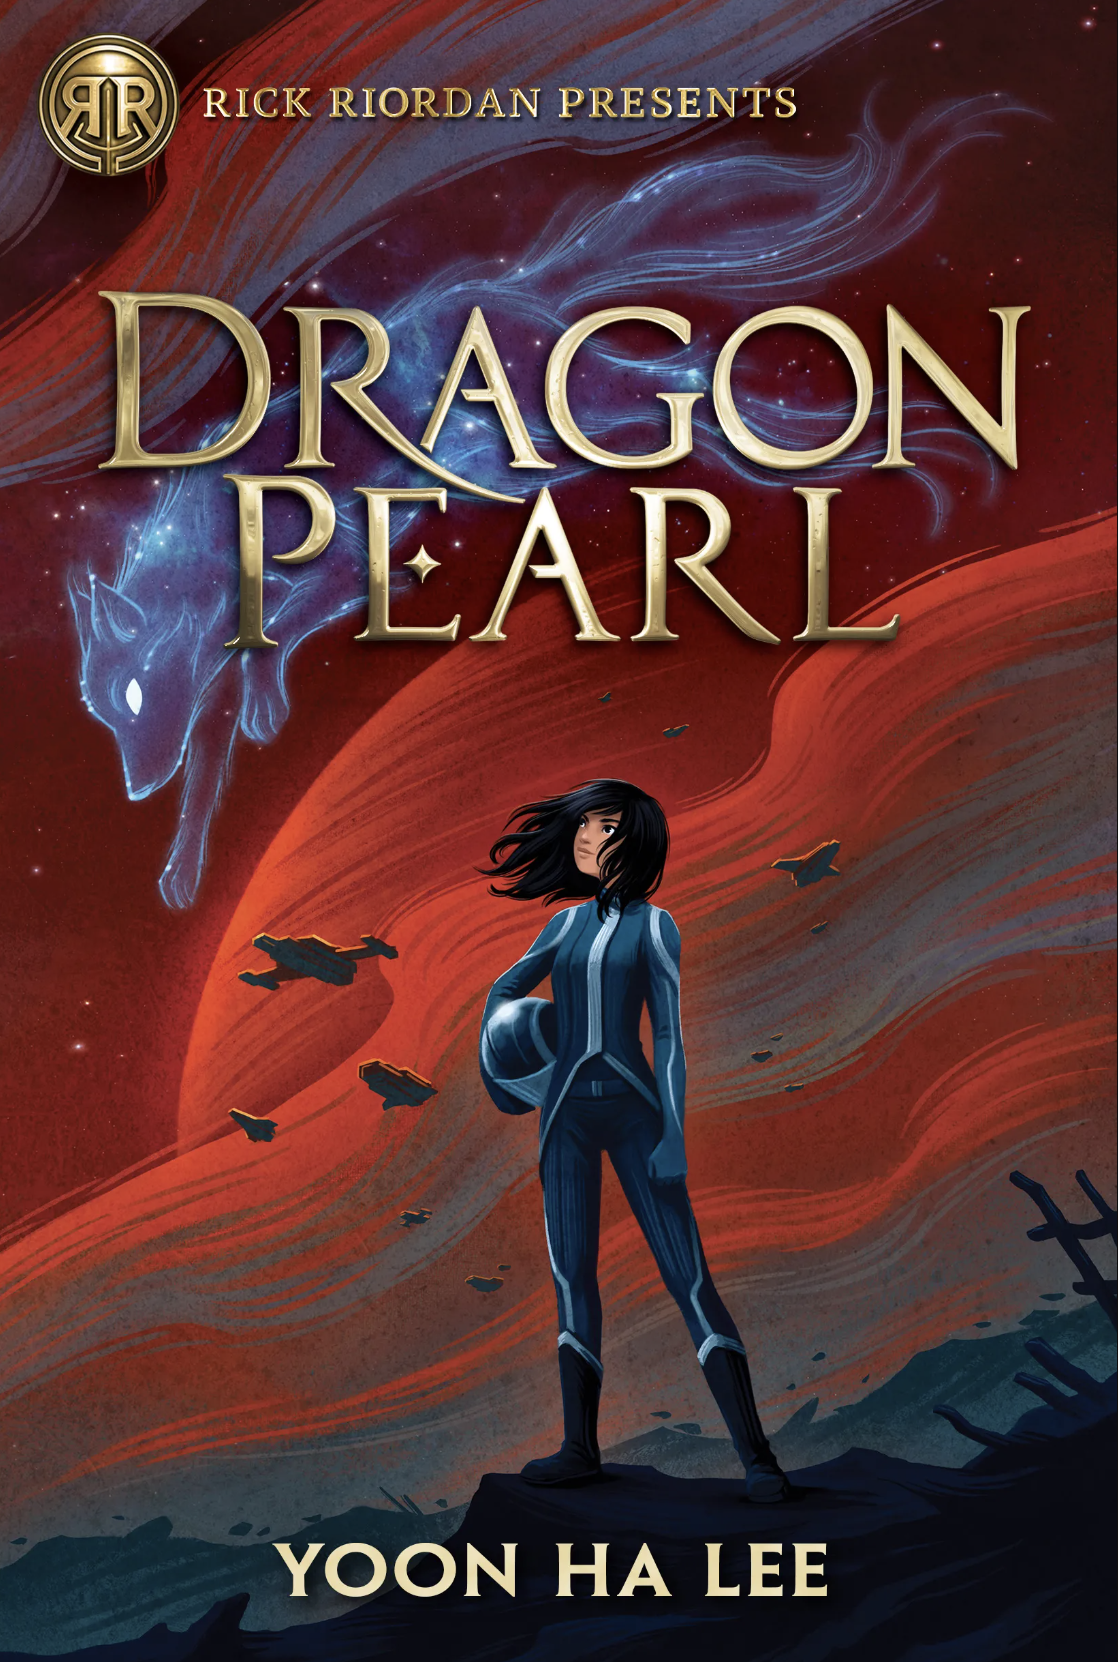 Image of the book Dragon Pearl by Yoon Ha Lee pictured, the cover including a red sky with the spirit of a wold flying overhead, a young girl dressed as a warrior standing on a rocky landscape below. Rick Riordan Presents is written at the top left in gold.